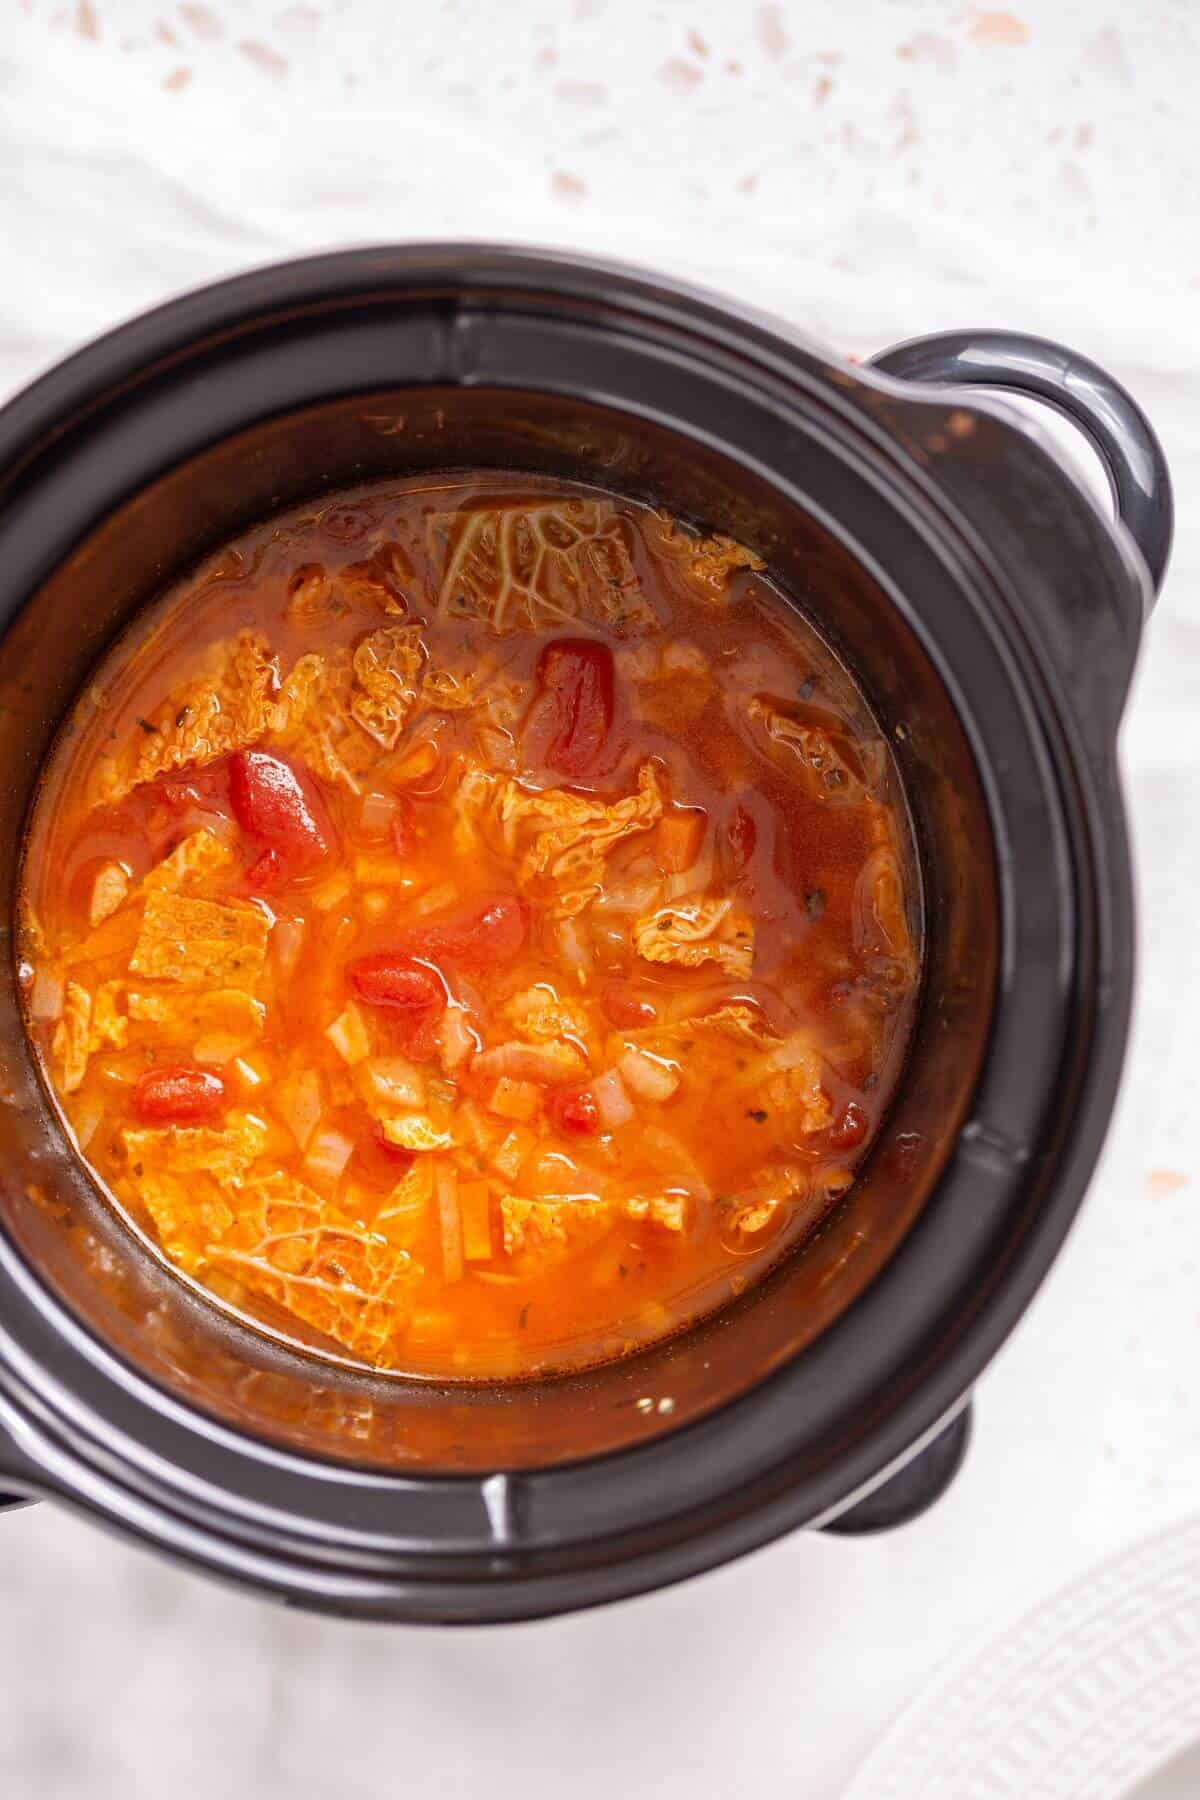 A crock pot full of cabbage soup on a table.